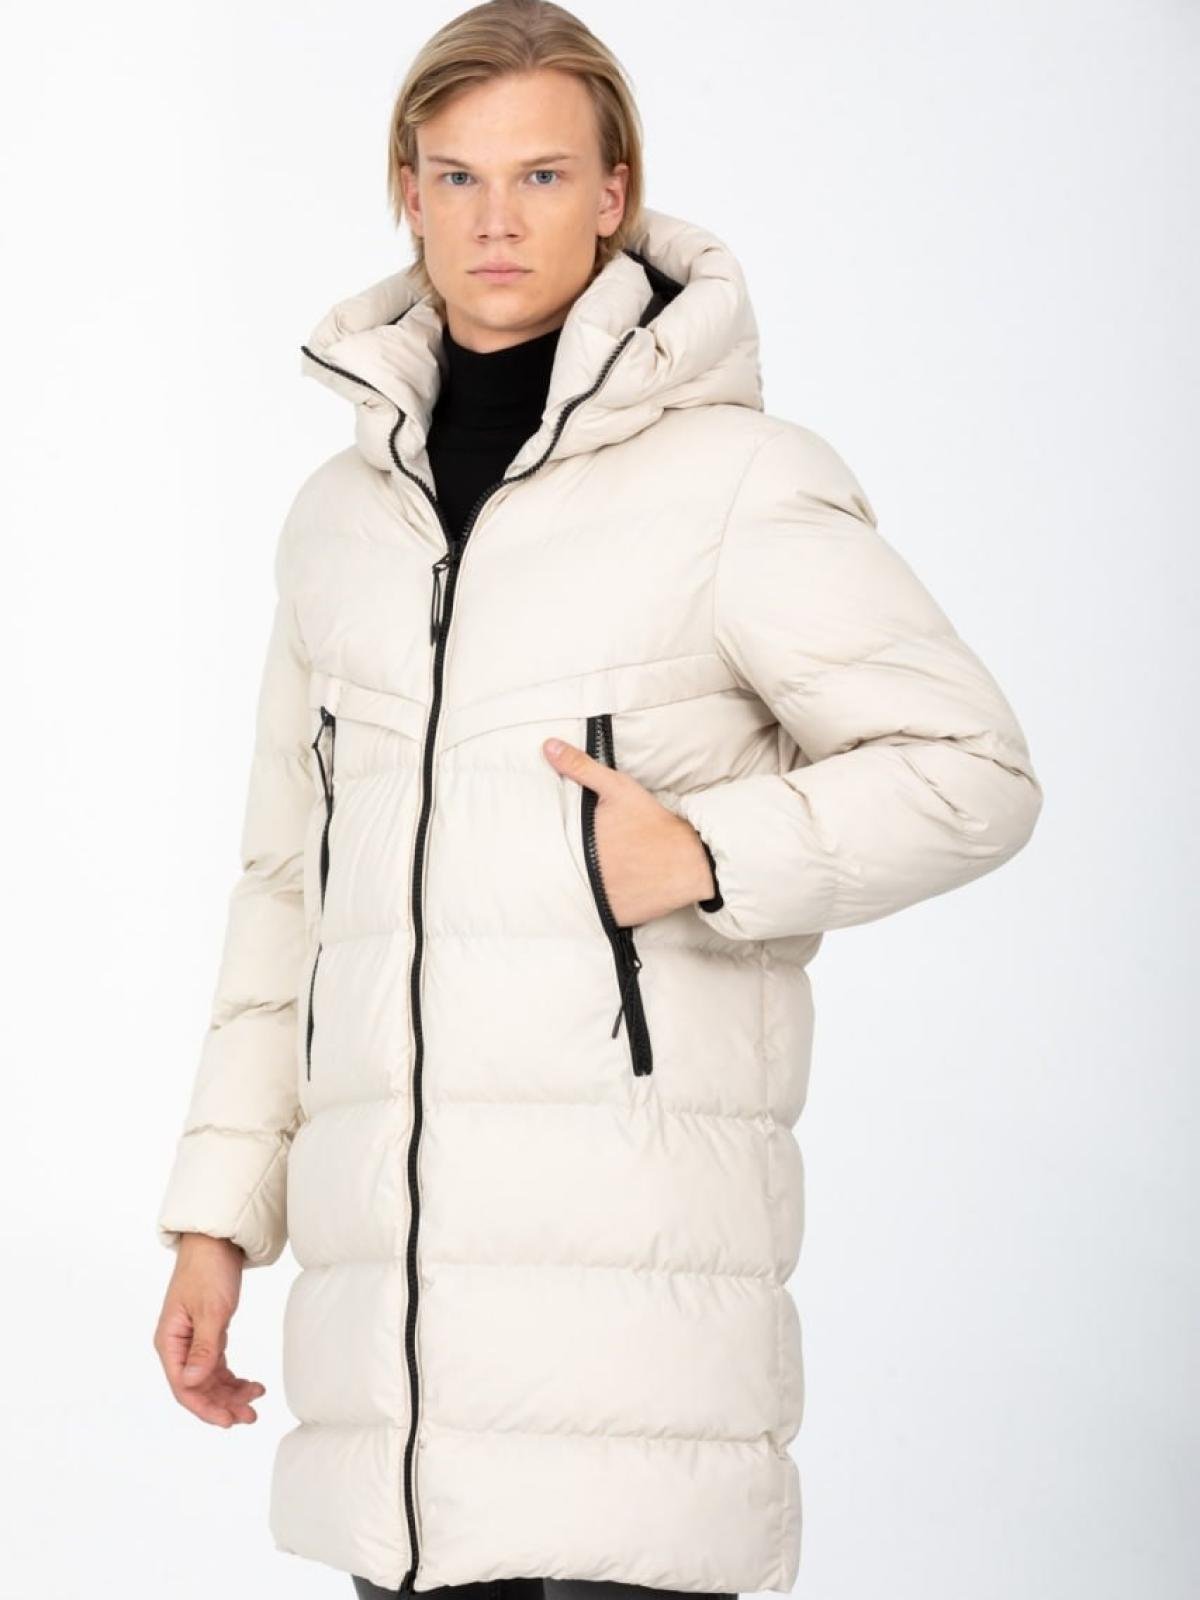 Men hooded puffer jacket wholesale Cream color | From Turkey